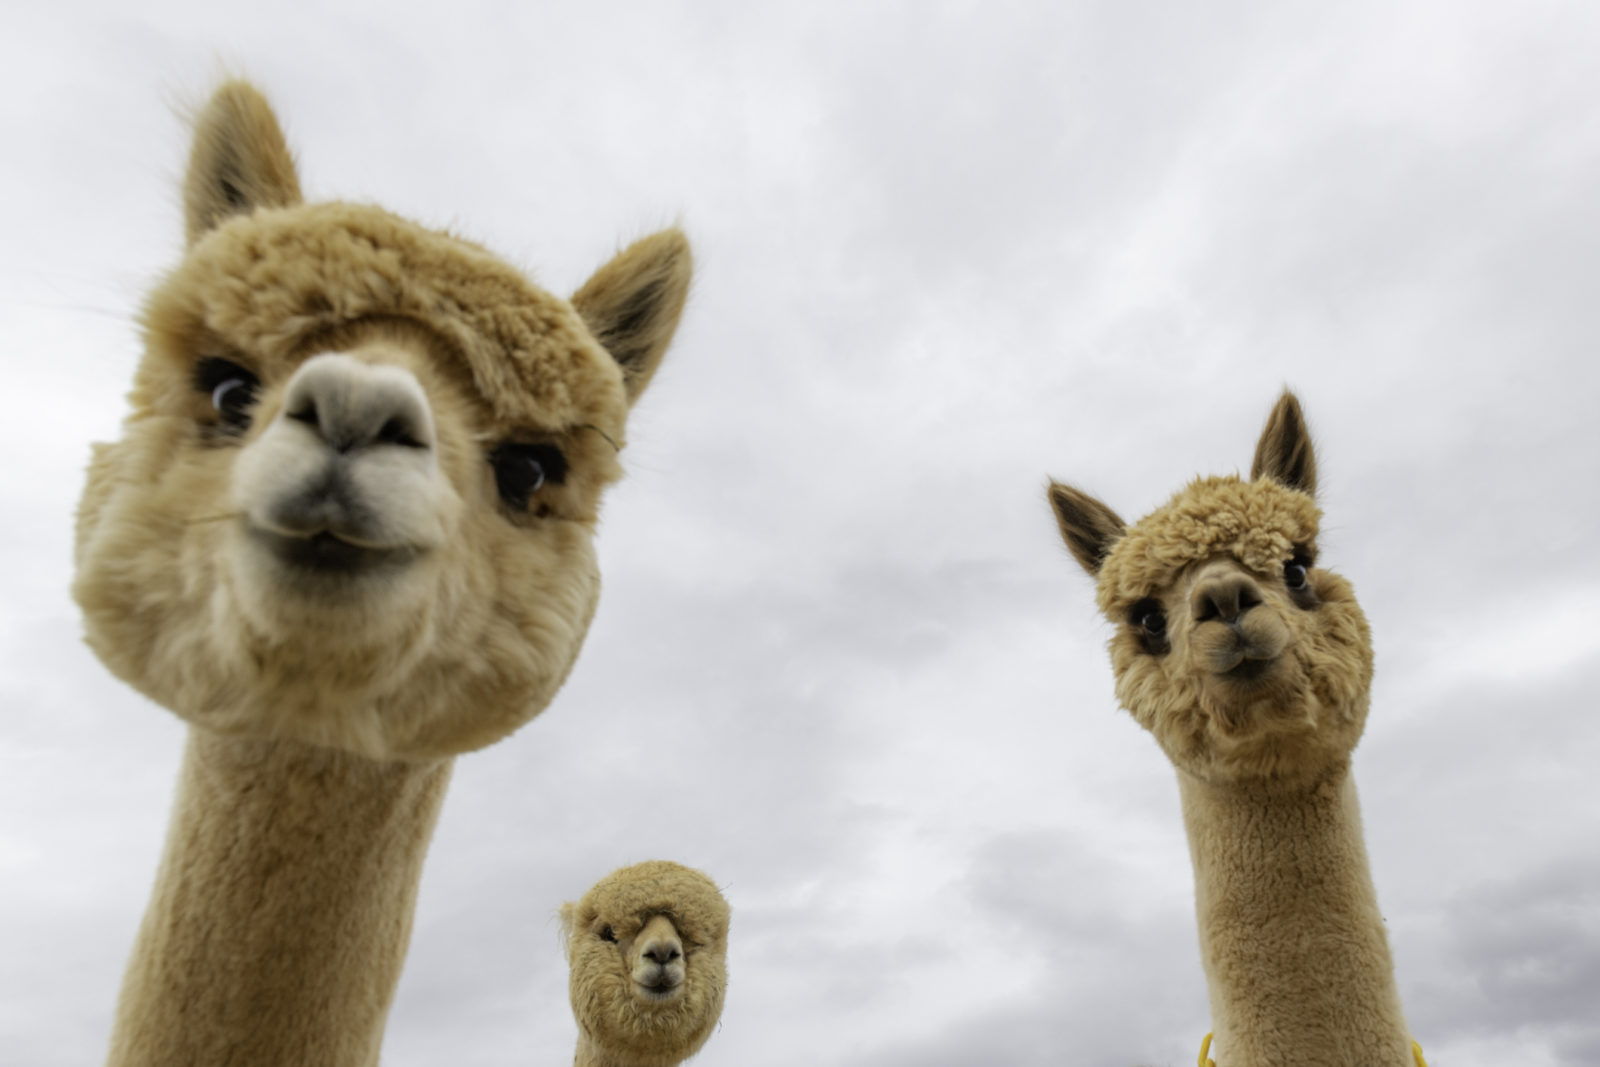 Meet the alpacas that are helping researchers who study autism, Alzheimer's  and cancer